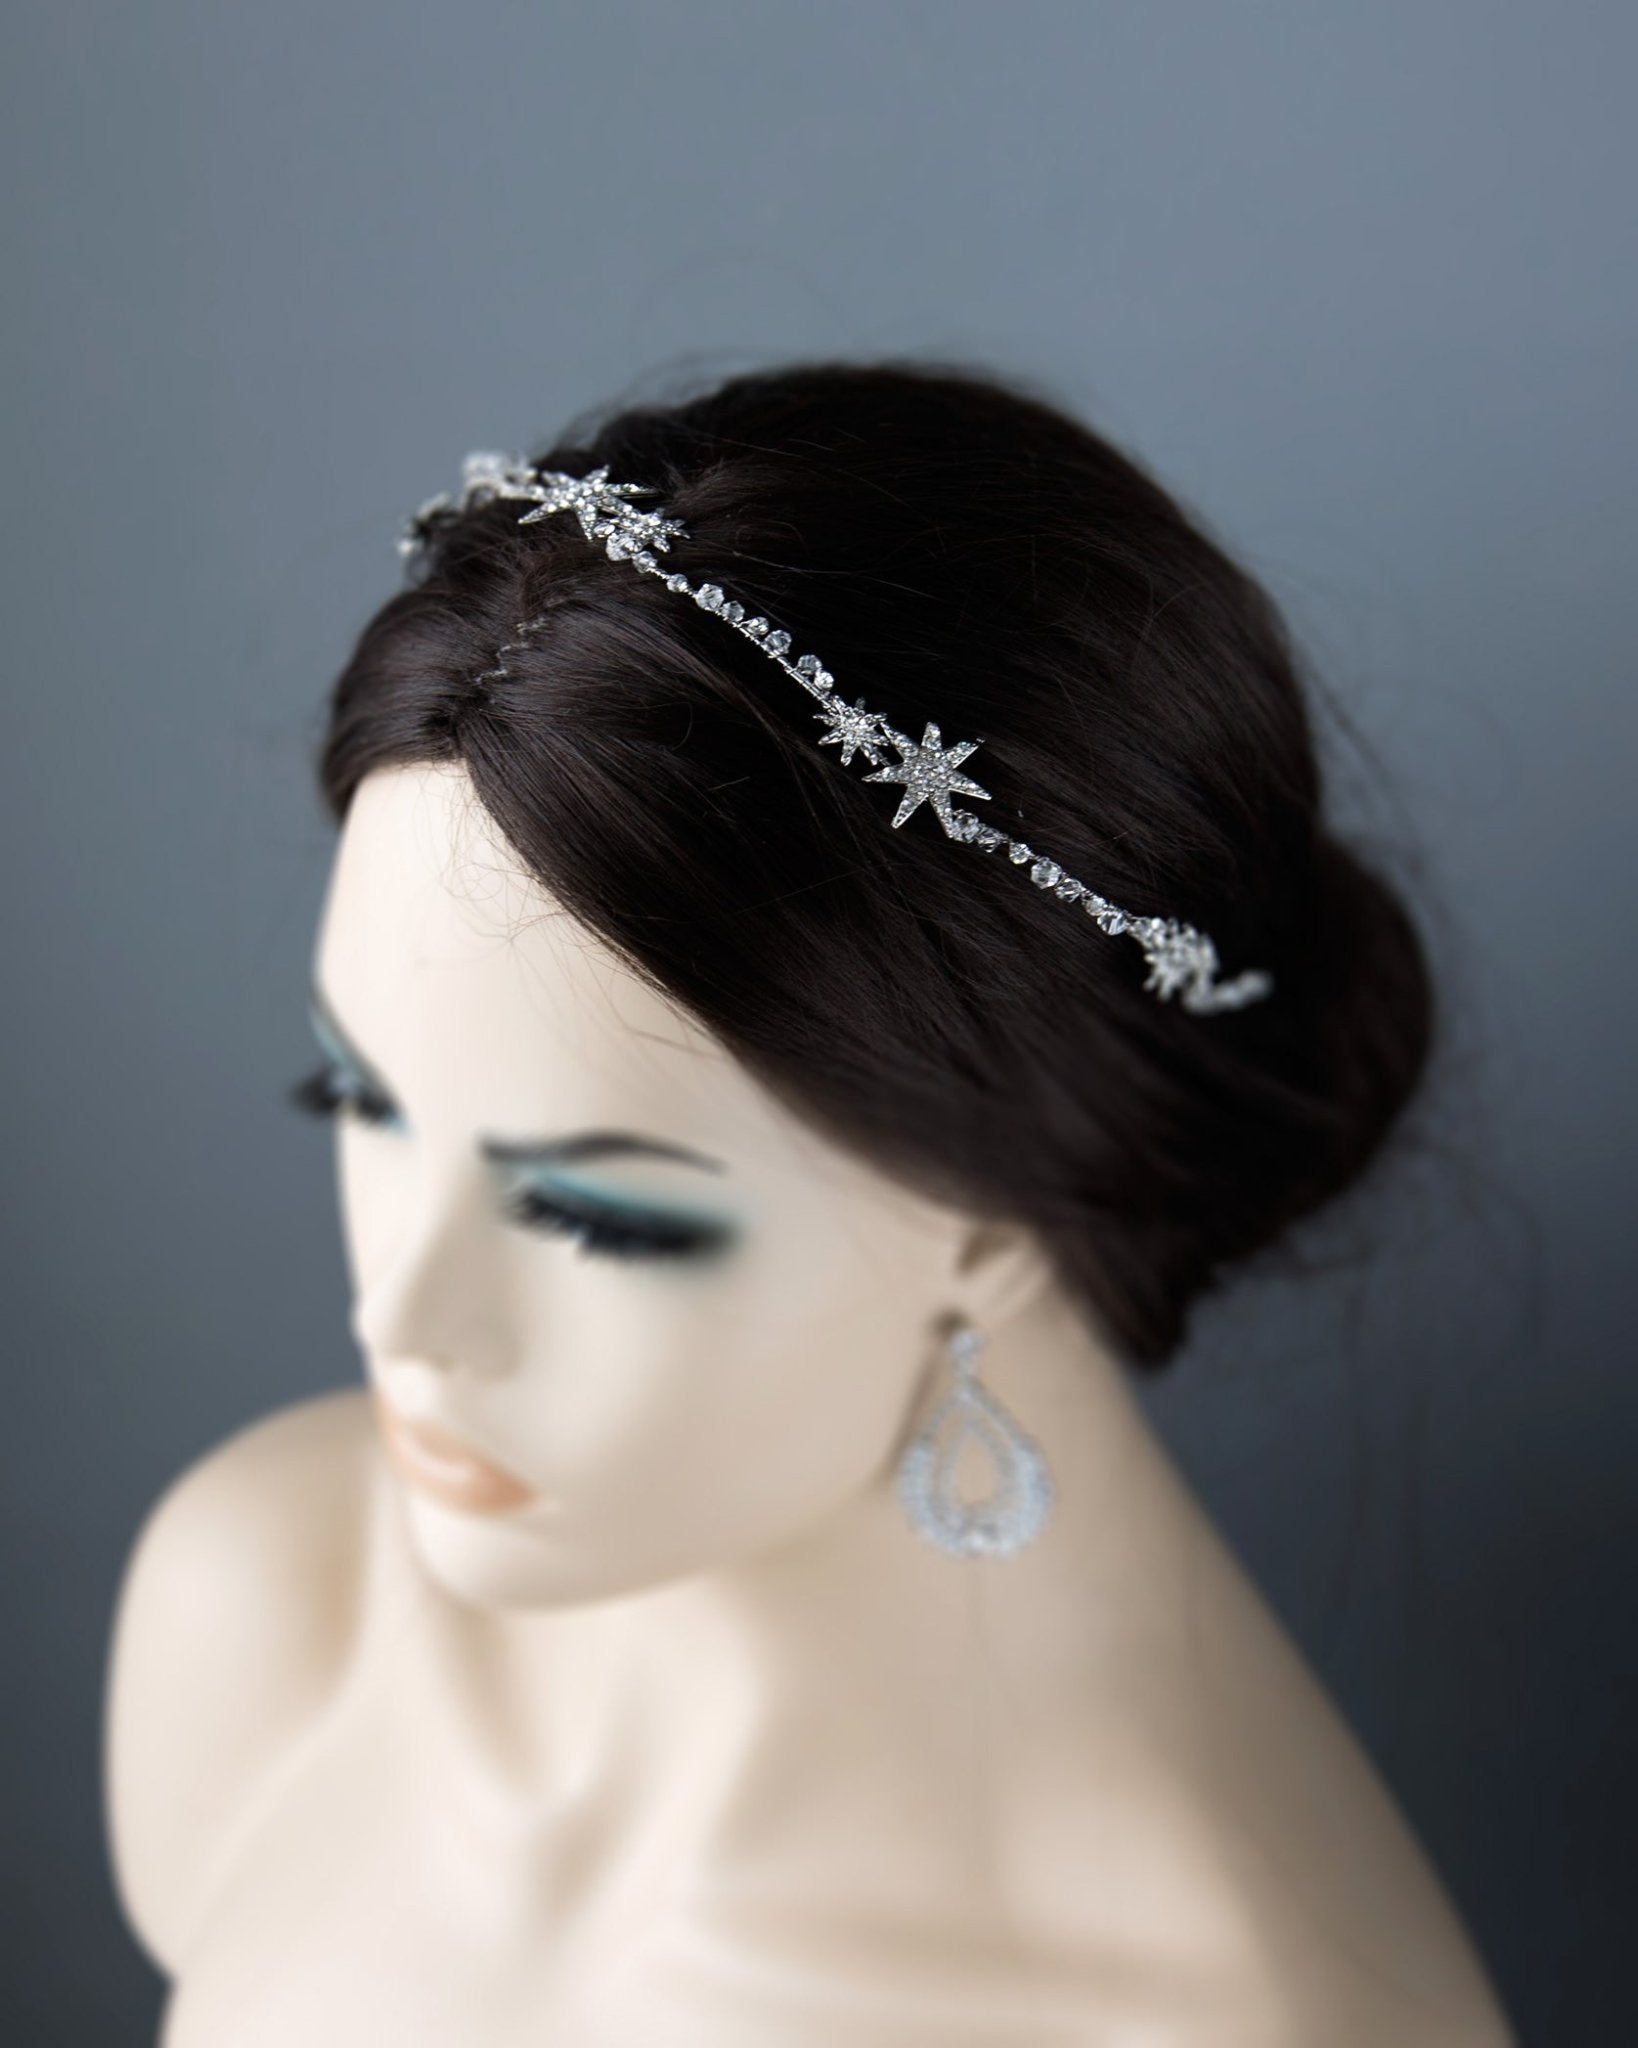 Antique Silver Stars and Crystals Headpiece - Cassandra Lynne